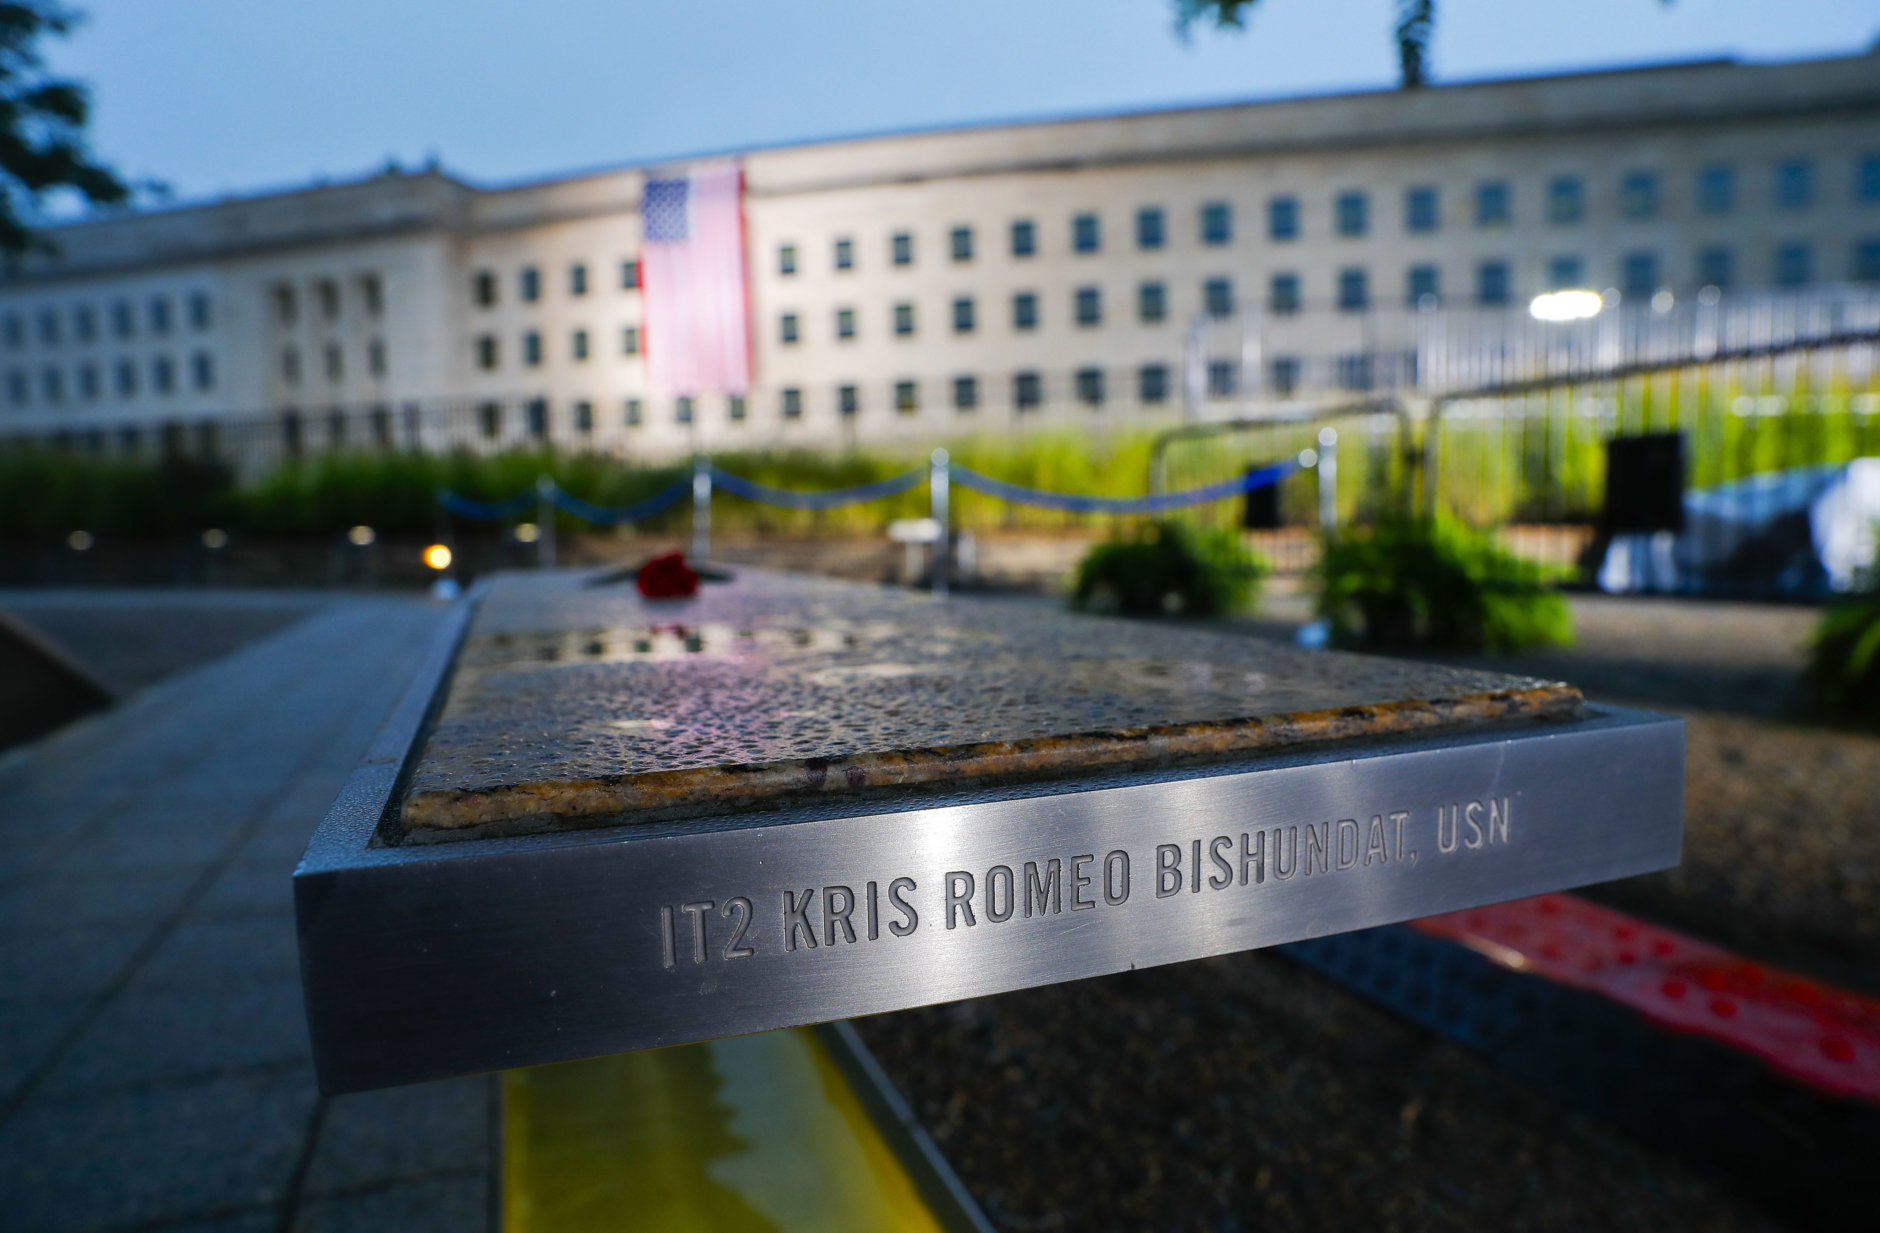 The National 9/11 Pentagon Memorial is seen in the foreground after the U.S. flag is unfurled Tuesday, Sept. 11, 2018, at the Pentagon on the 17th anniversary of the Sept. 11, 2001, terrorist attacks. (AP Photo/Pablo Martinez Monsivais)